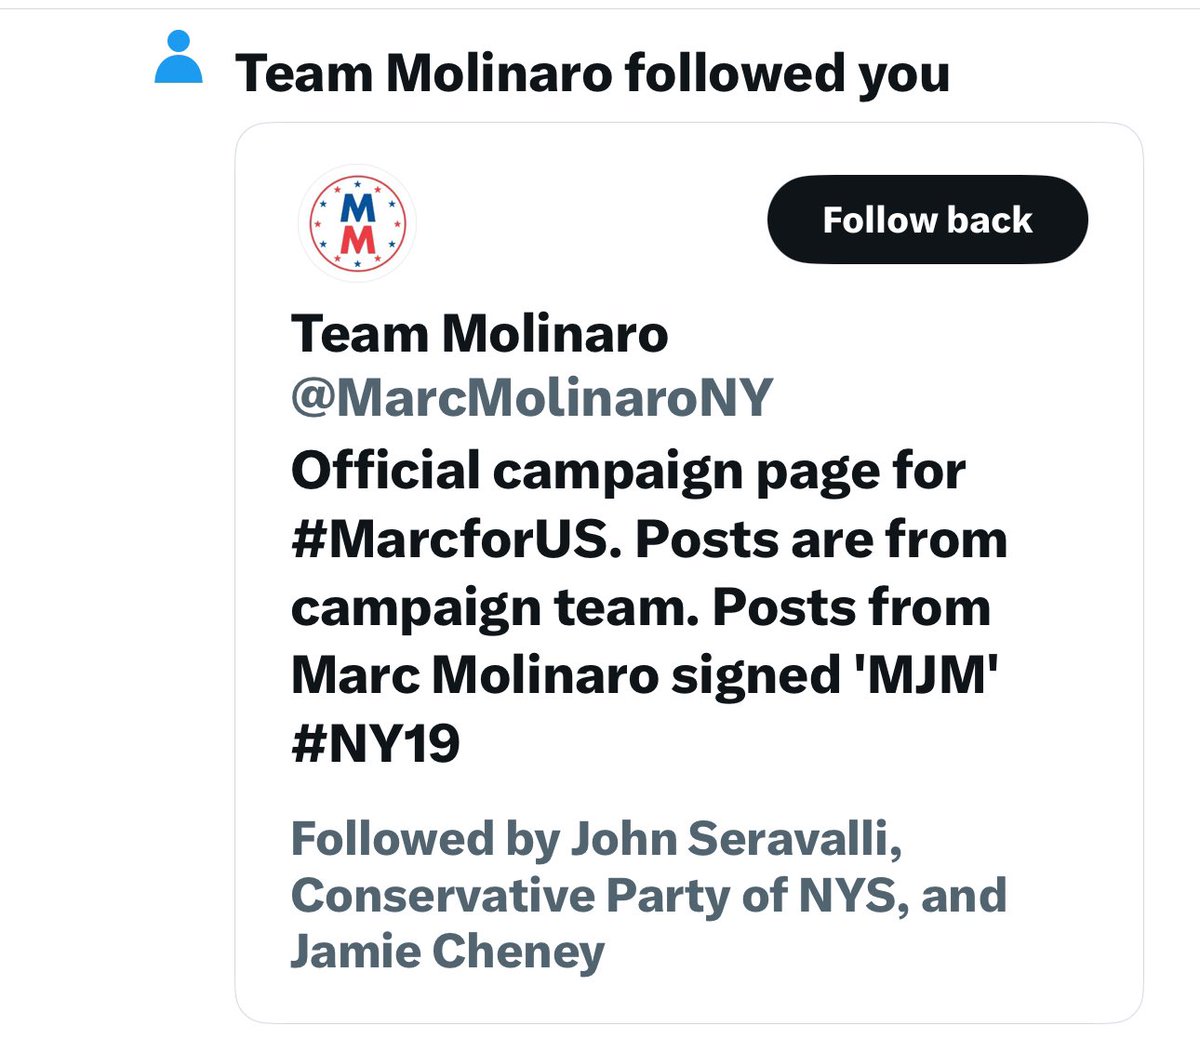 Heads Up #TeamMolinaro 

I’m not a political op. I’m involved in no organized political group. I’m just an everyday citizen reporting on following the money in NY politics 

I don’t do innuendo & I don’t post anything ‘till I have dead on facts 
w/receipts

If I say it, it’s true